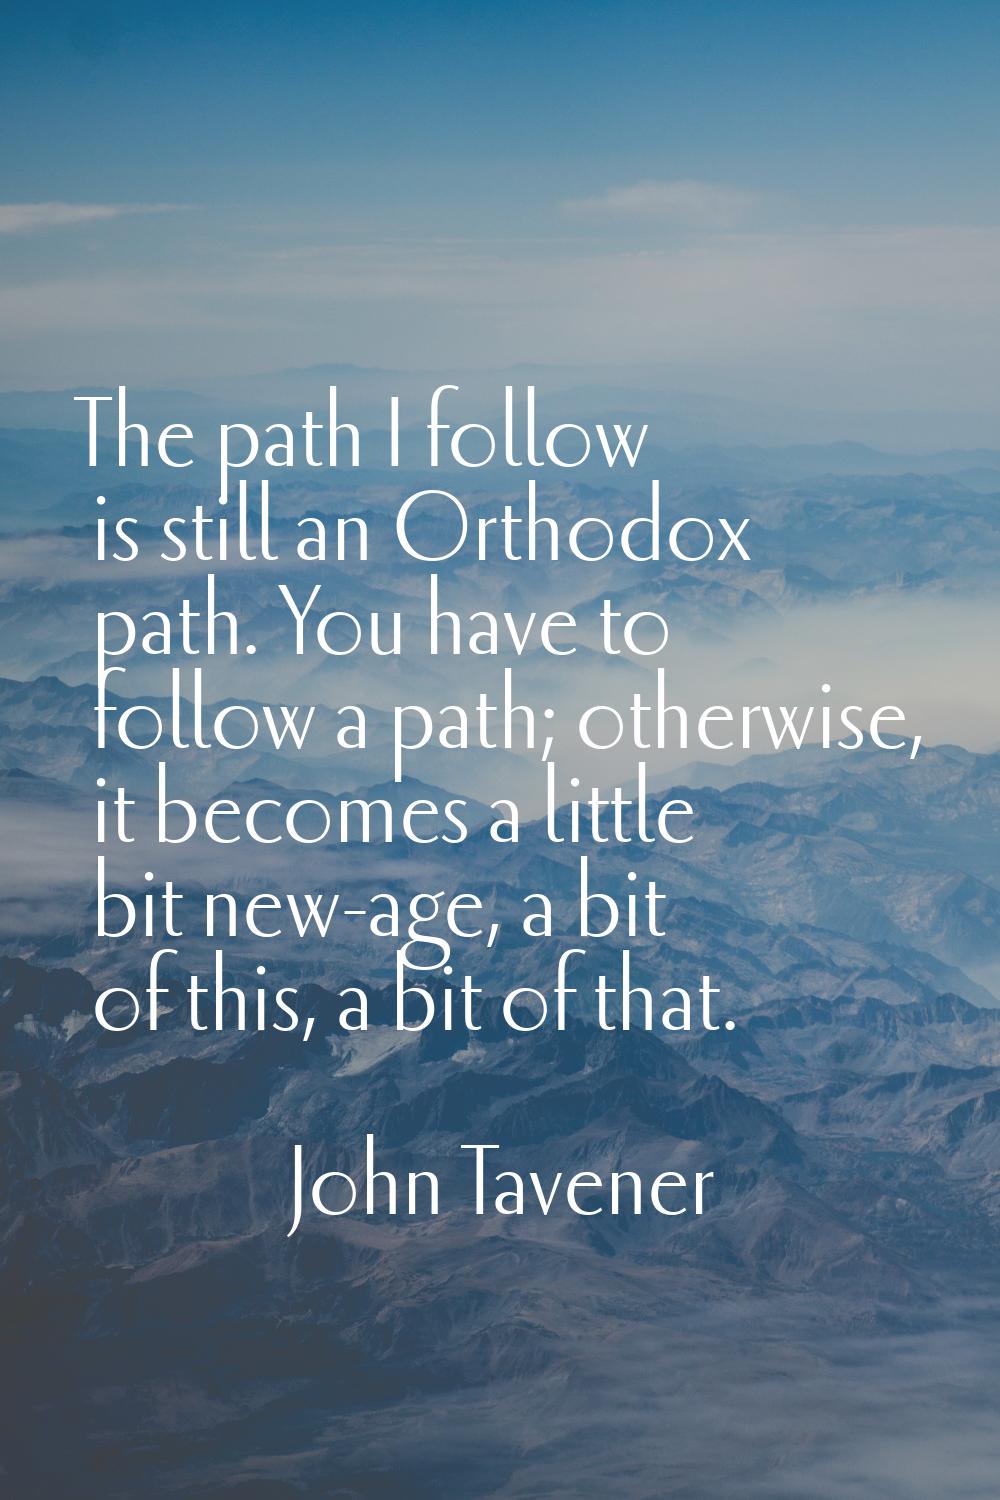 The path I follow is still an Orthodox path. You have to follow a path; otherwise, it becomes a lit